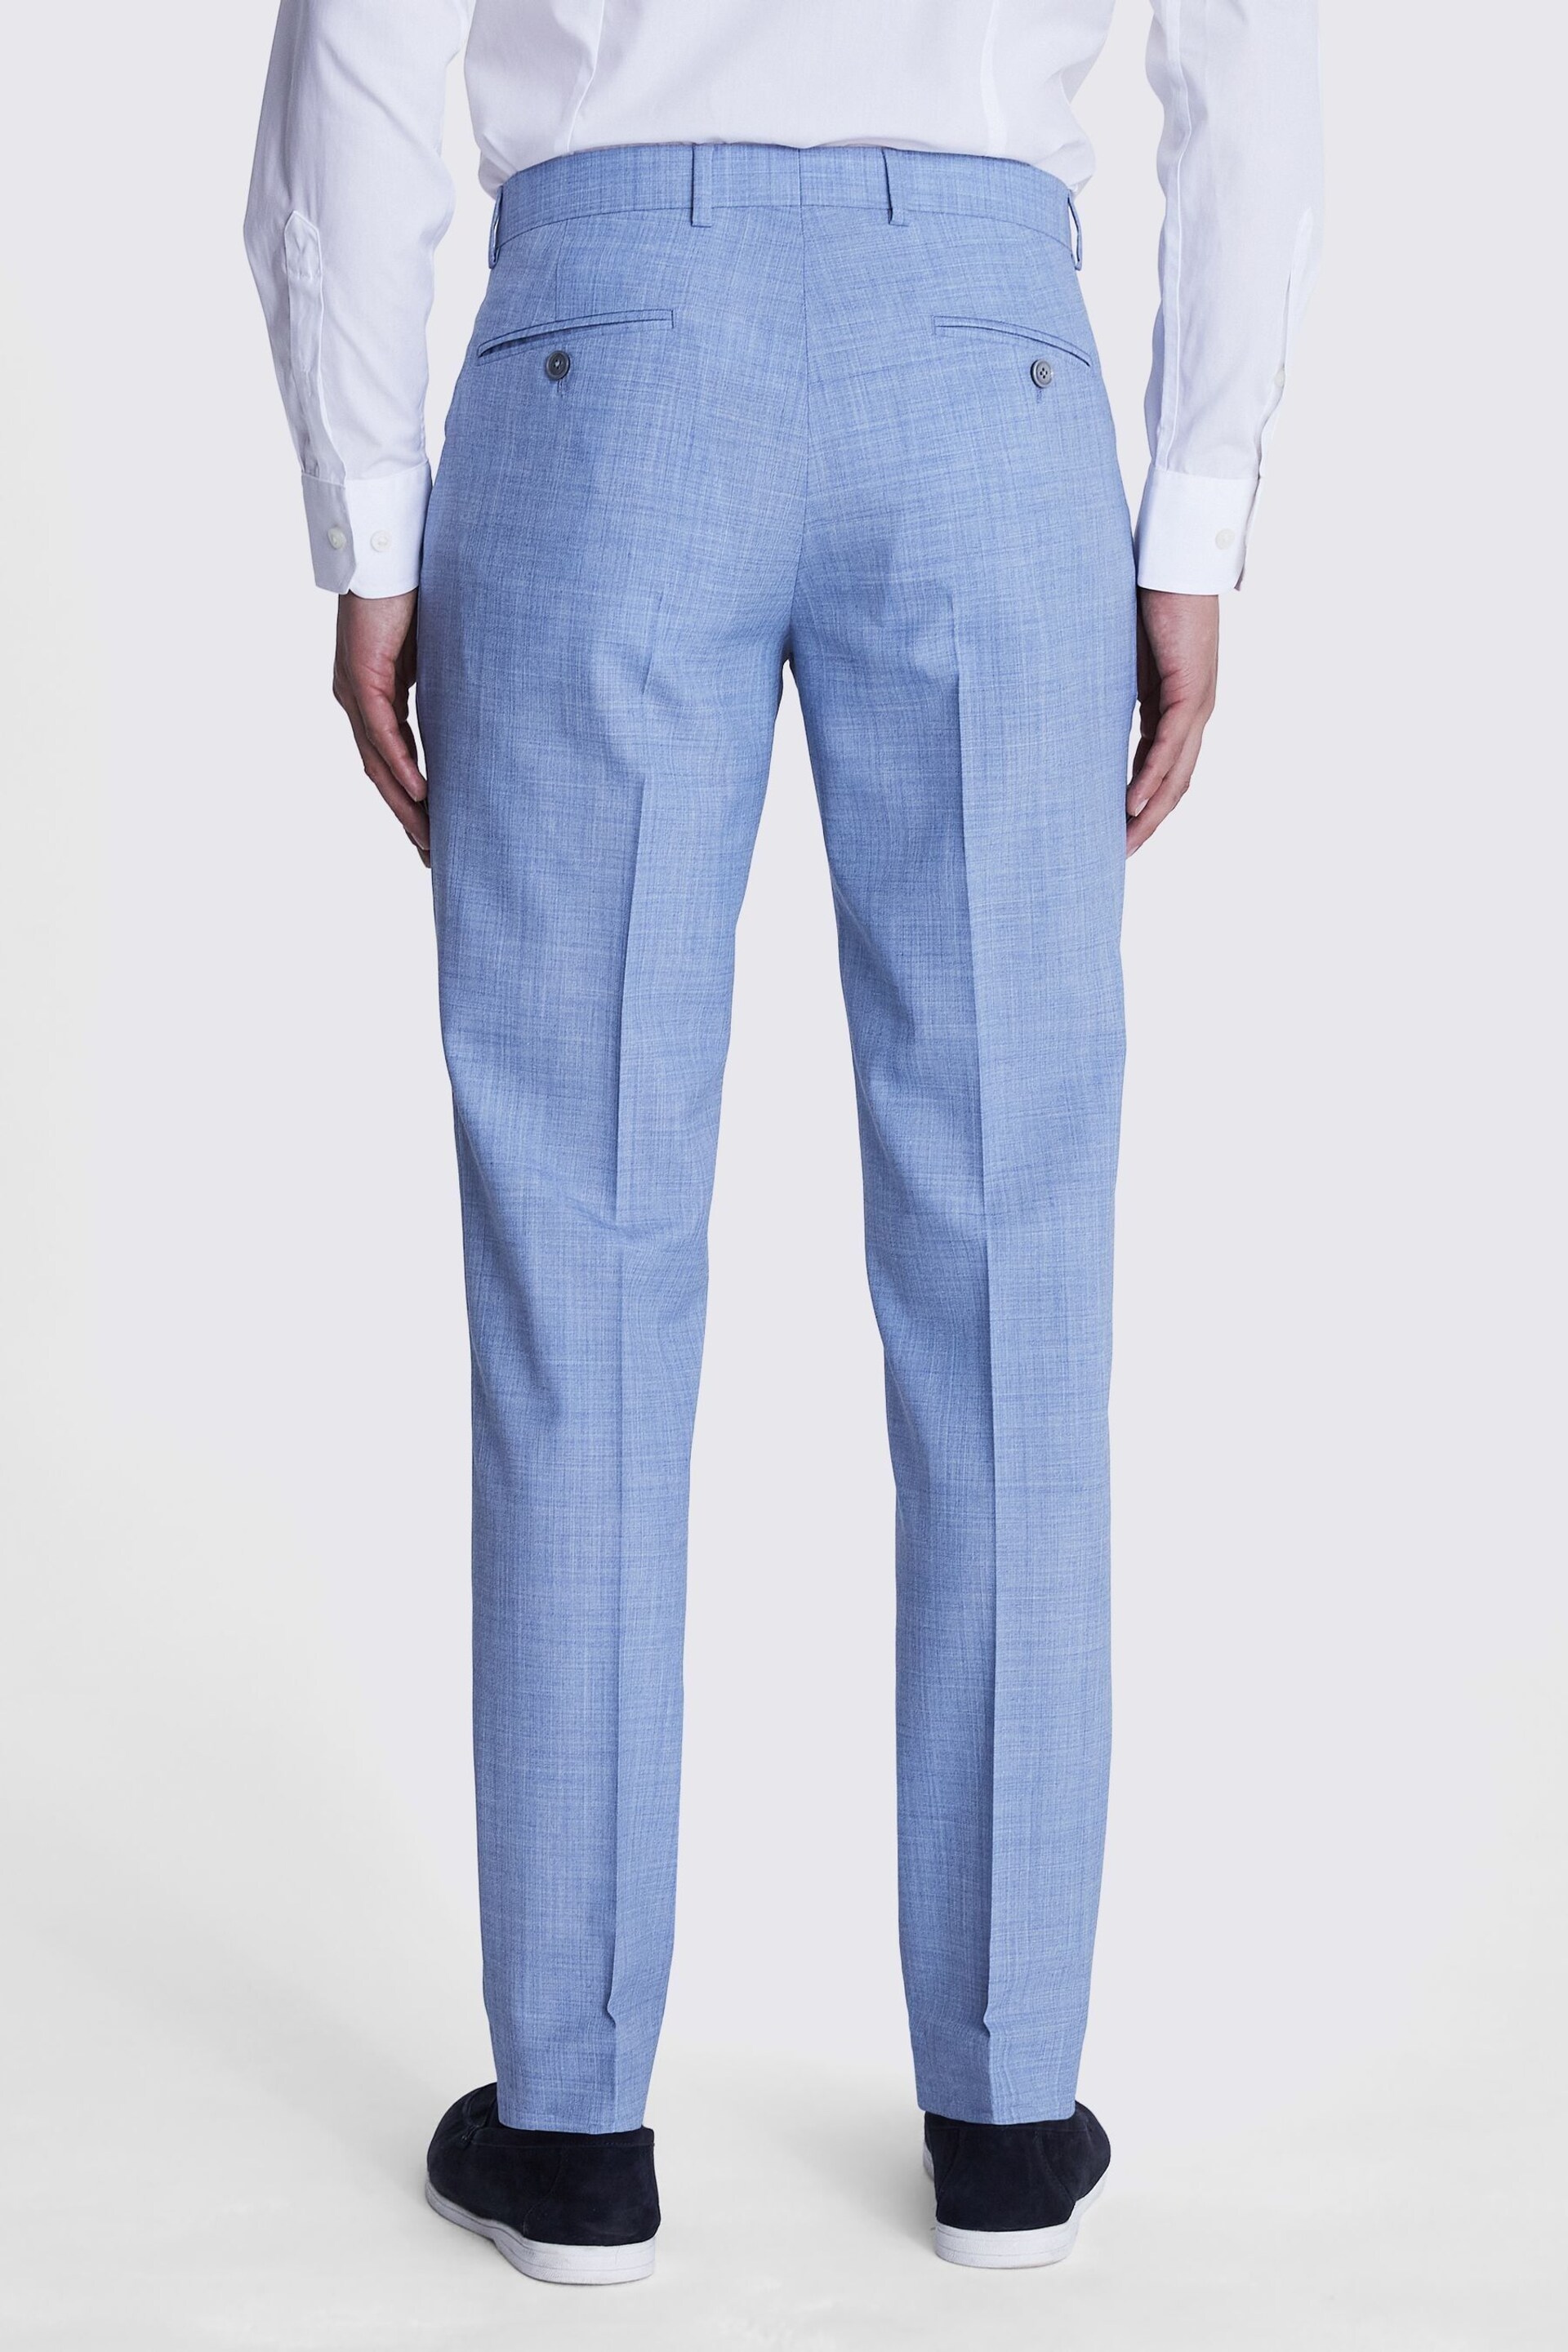 MOSS Slim Fit Sky Blue Marl Trousers - Image 2 of 3